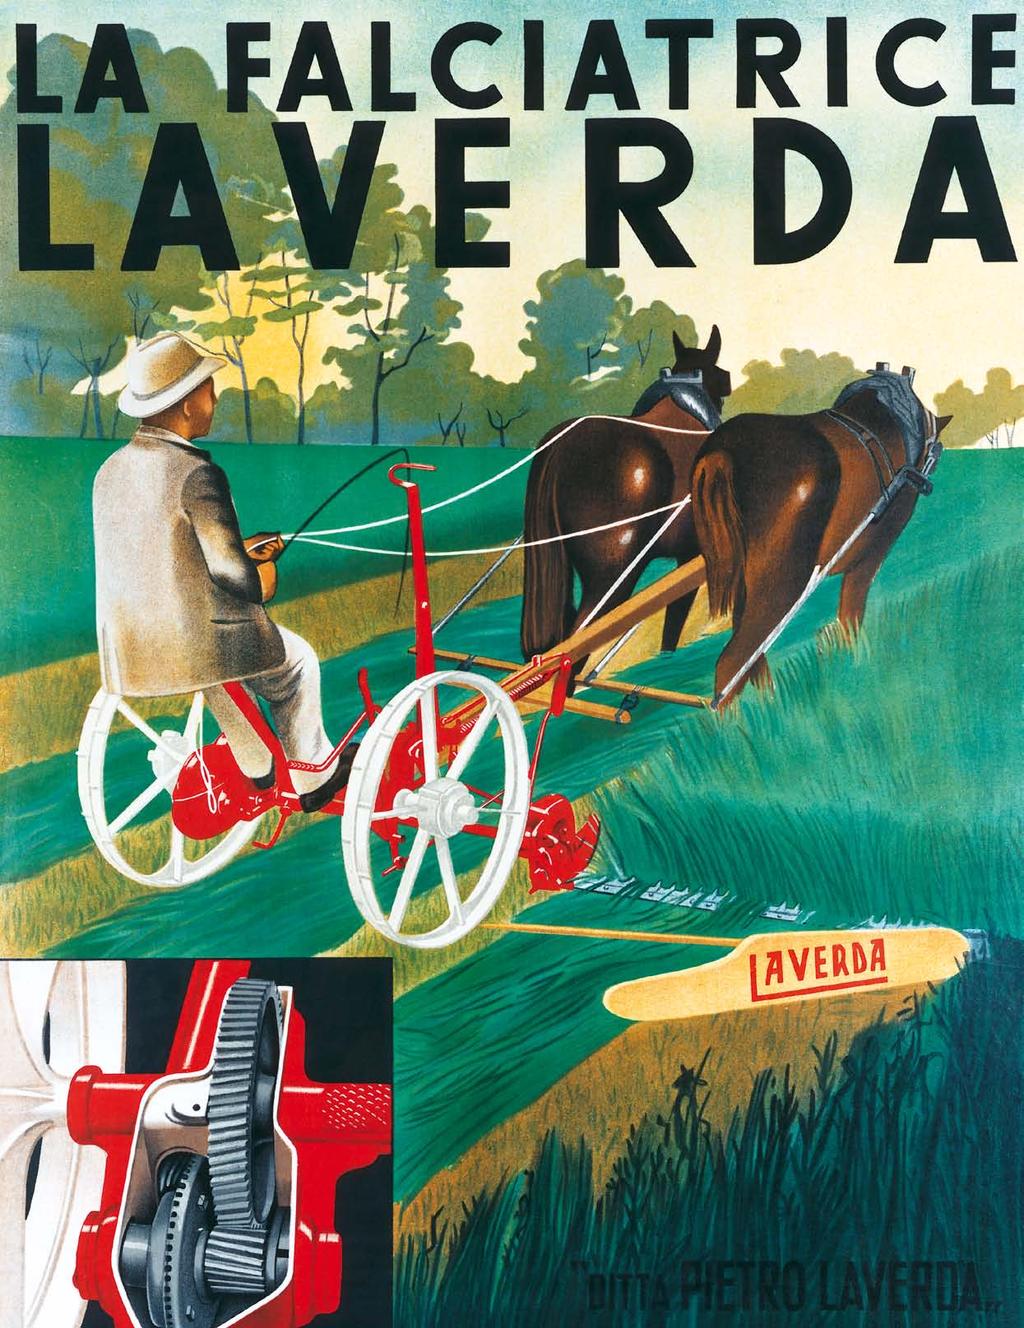 The only Italian company to produce combine harvesters, Laverda founded by Pietro Laverda in 1873, was